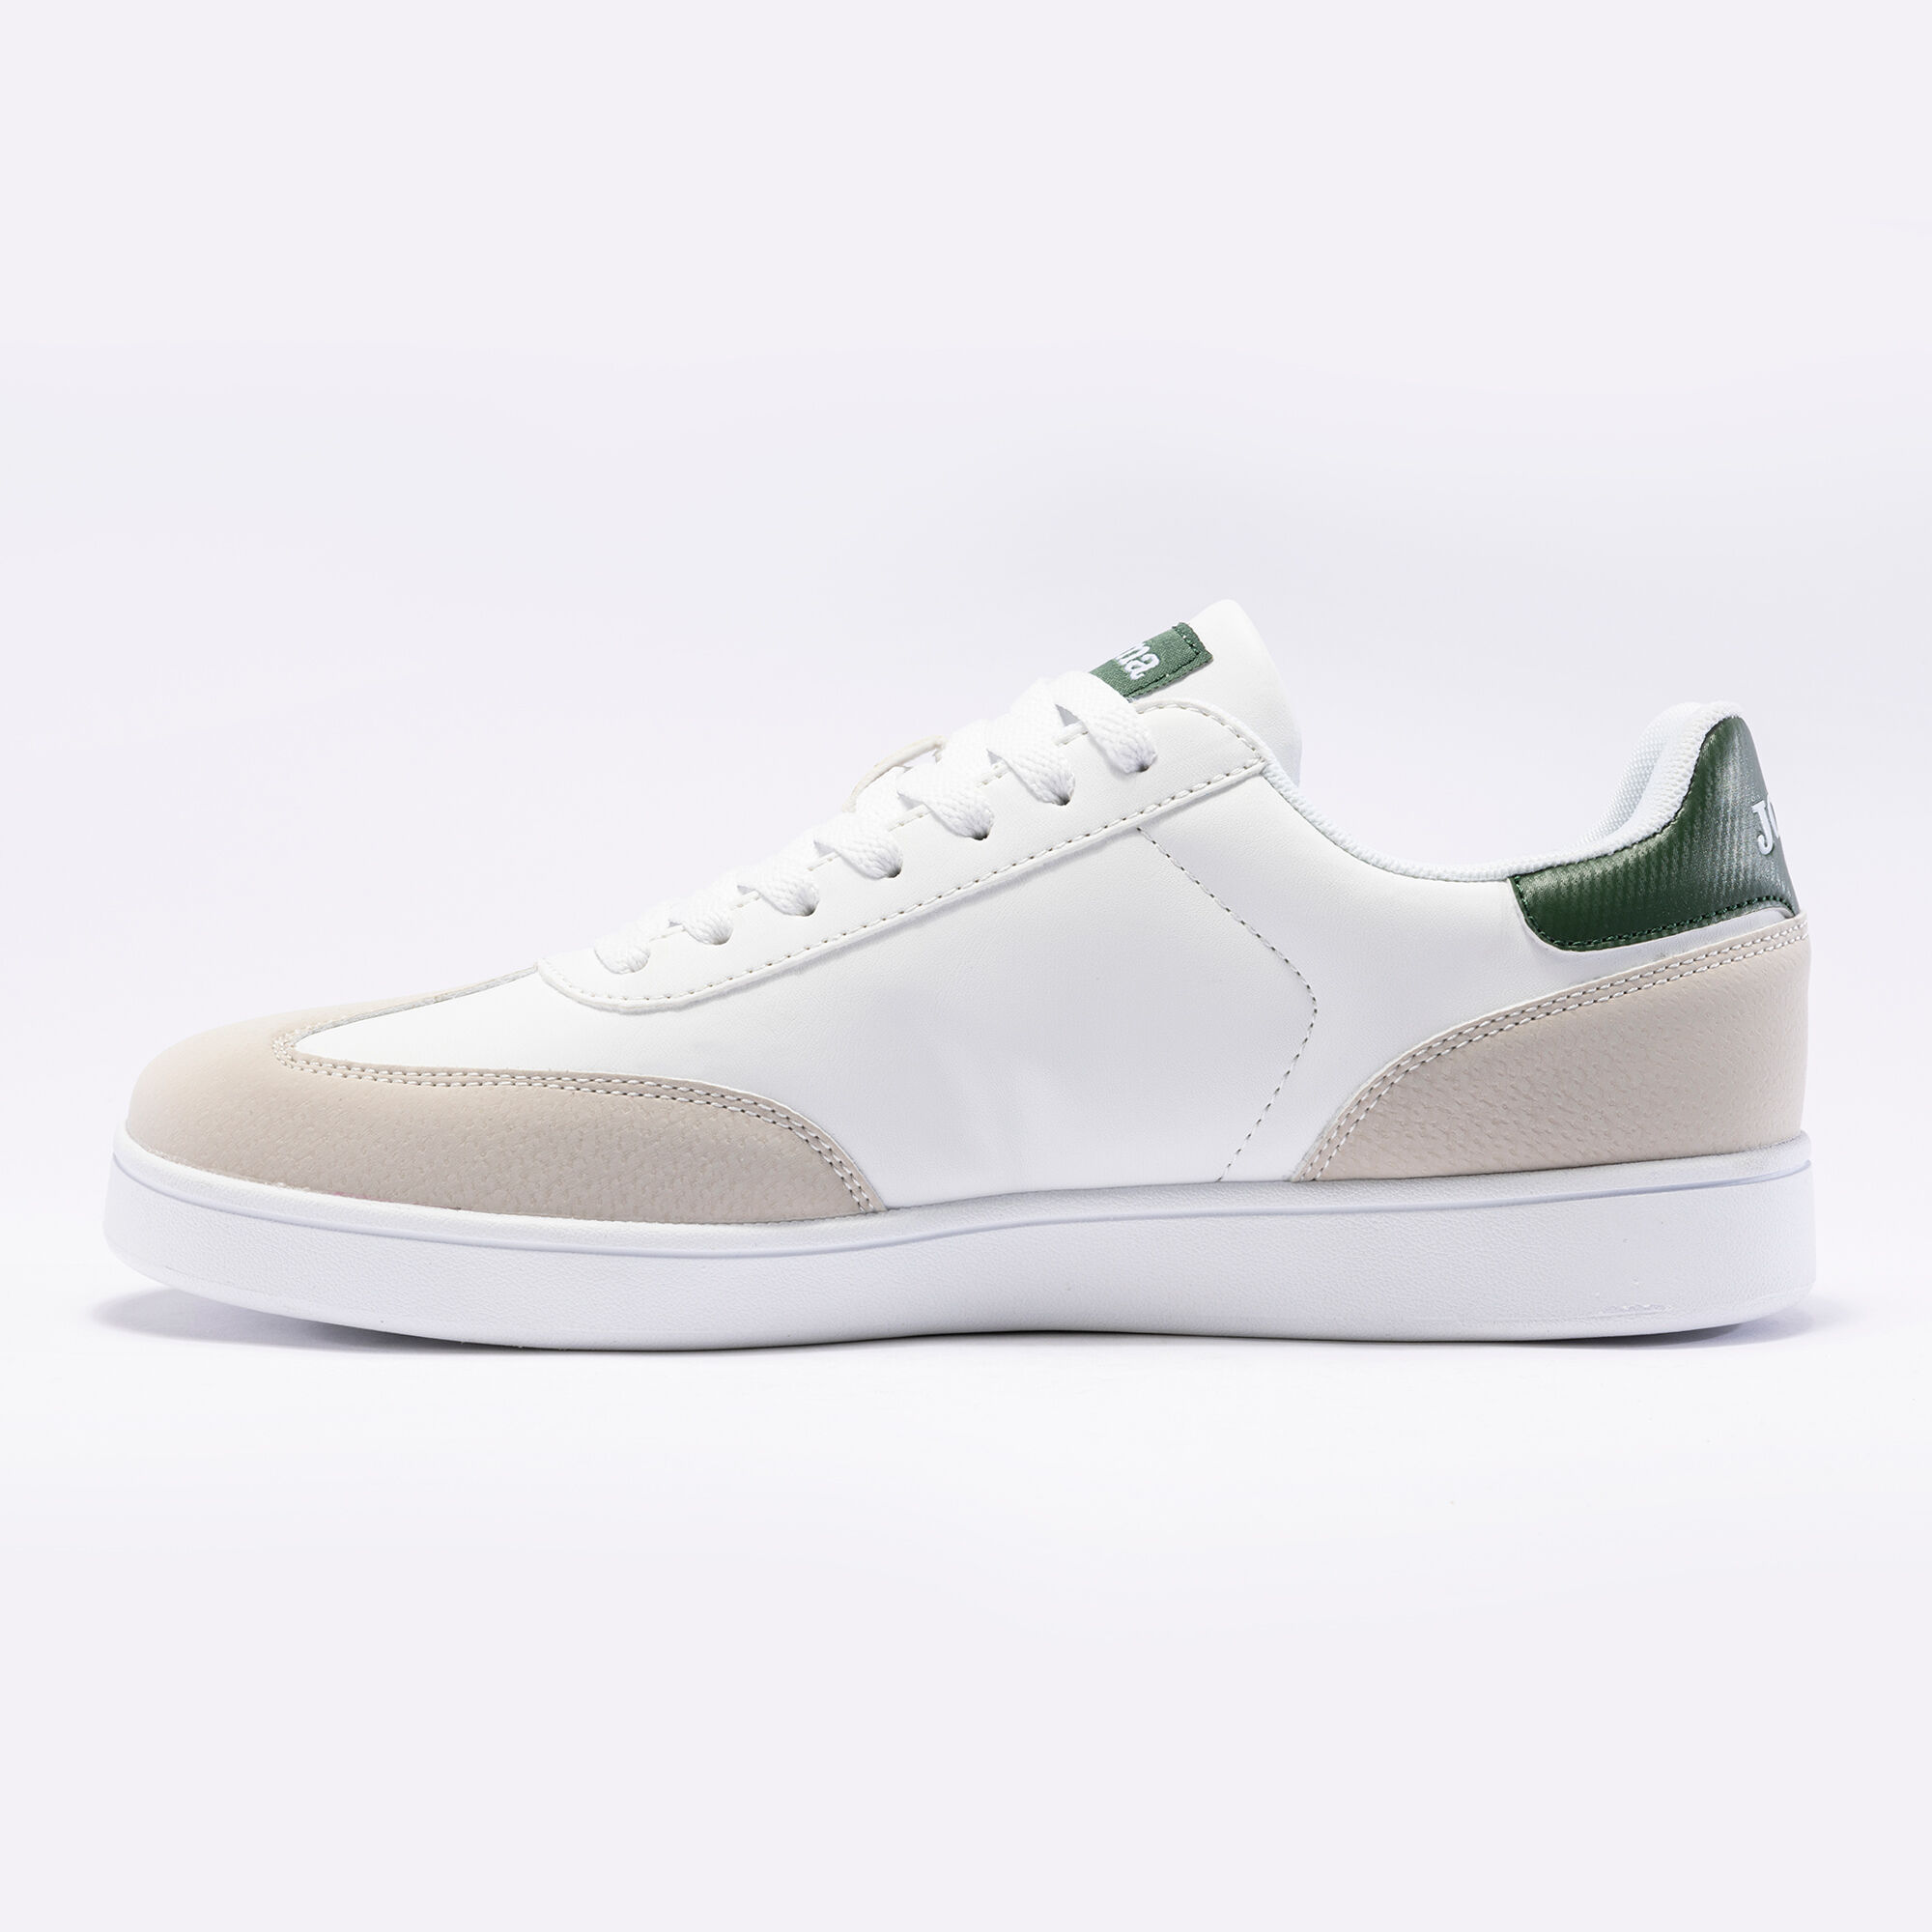 Casual shoes C.Campus Men 24 man white green